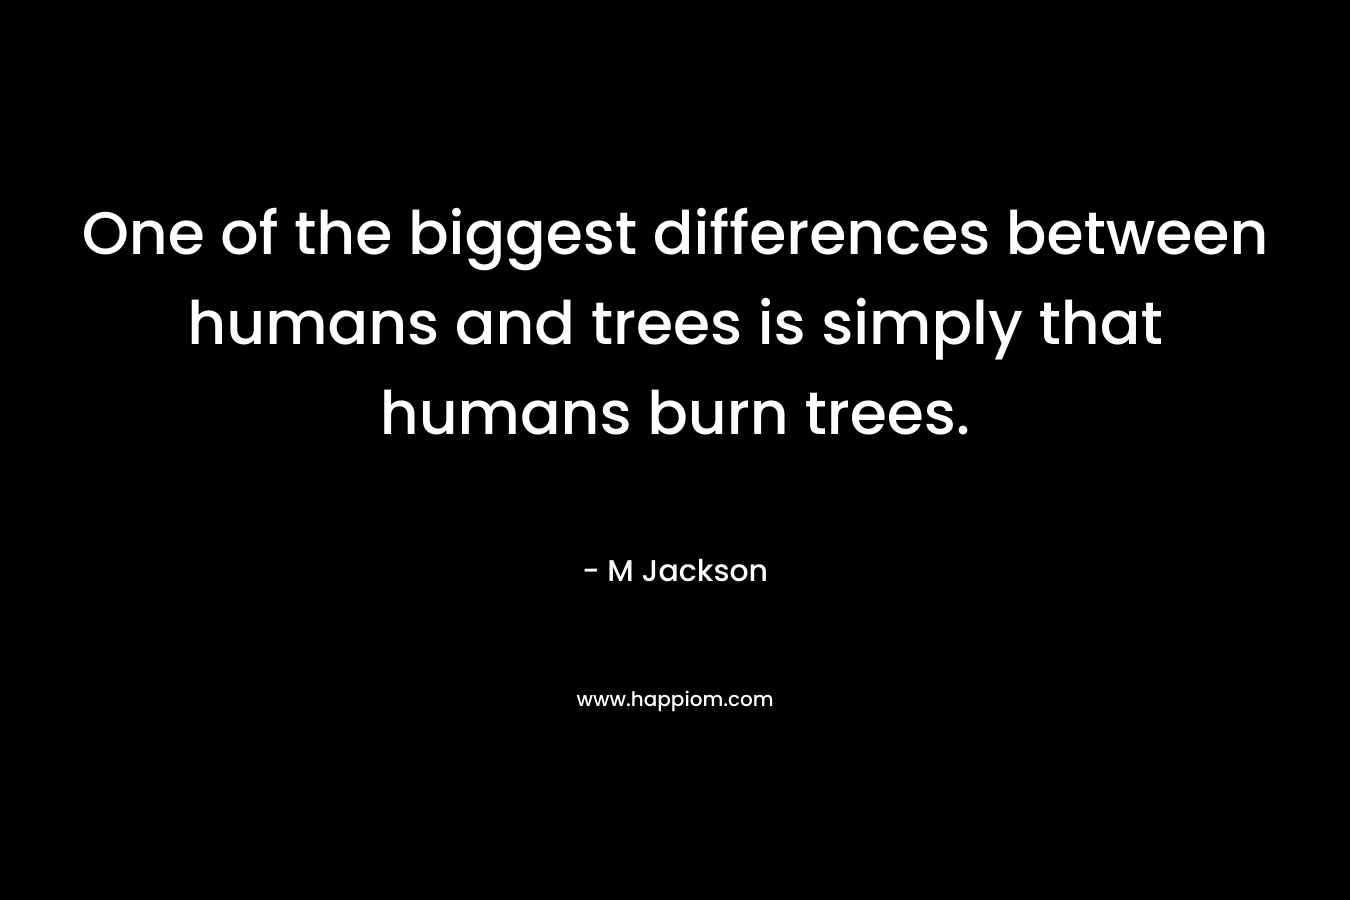 One of the biggest differences between humans and trees is simply that humans burn trees.